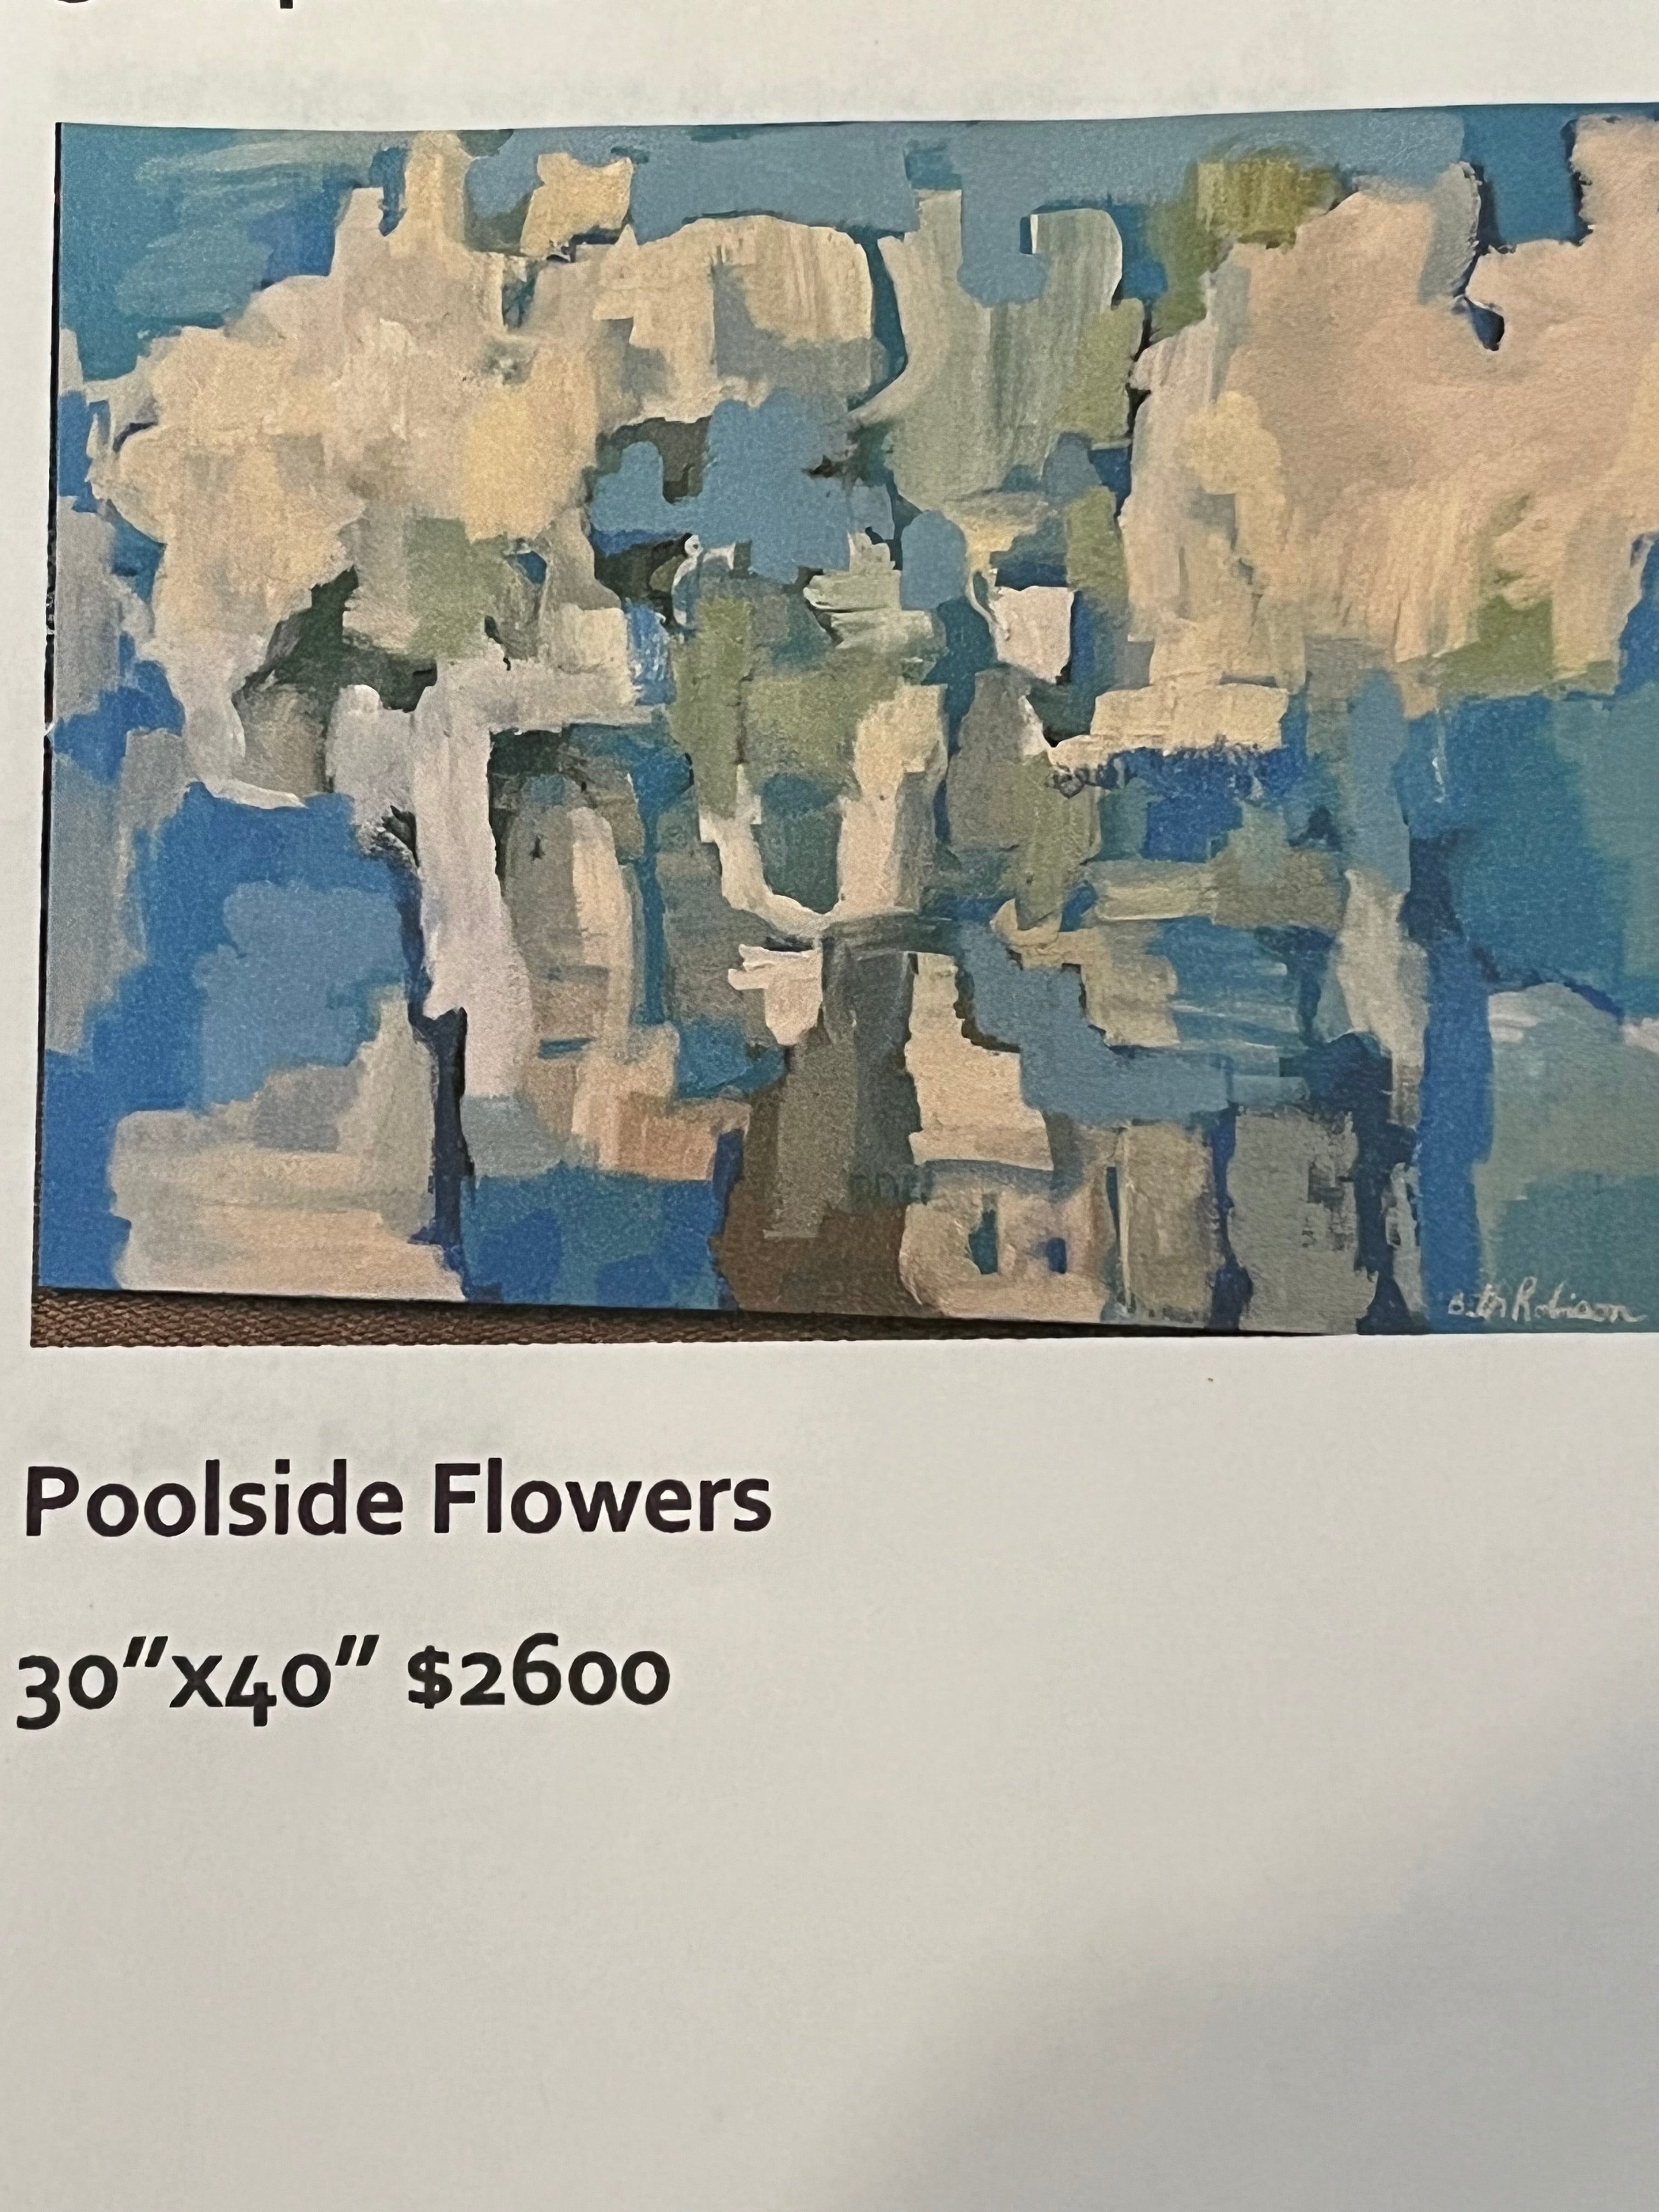 Poolside Flowers by Beth Robison